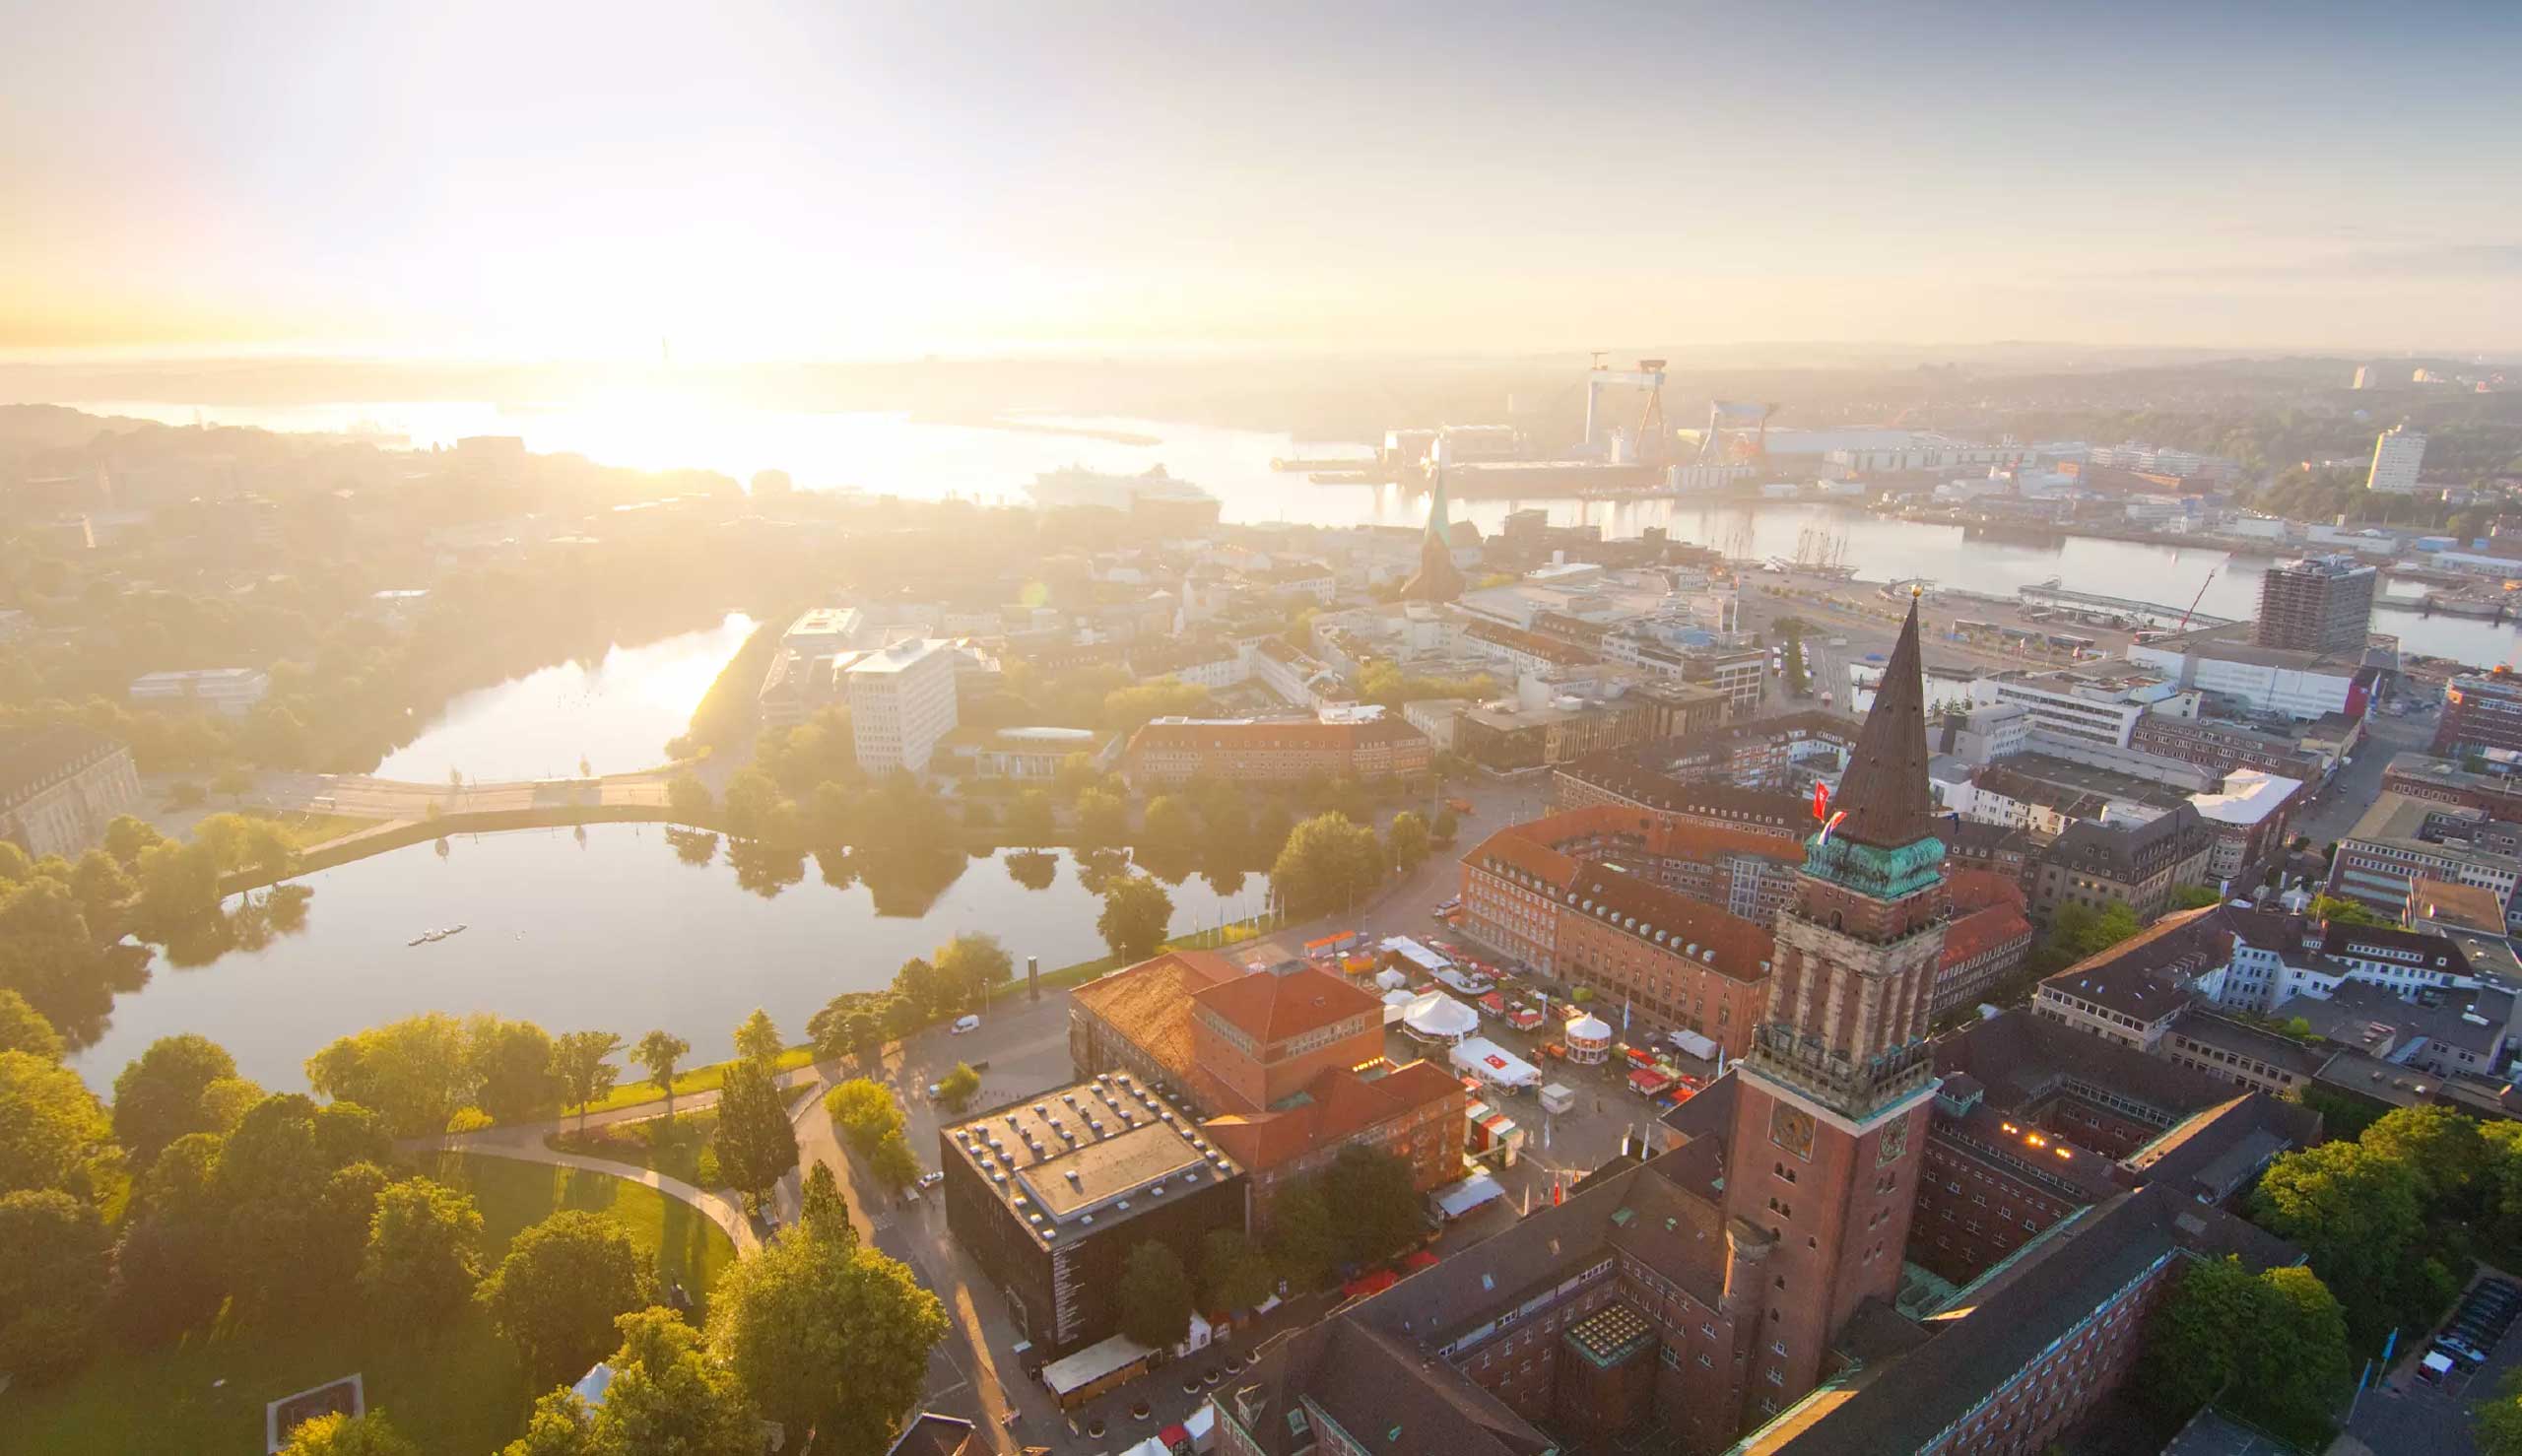 A colorful mix of culture and port city awaits you in Kiel. Copyright: Oliver Frank / Kiel-Marketing